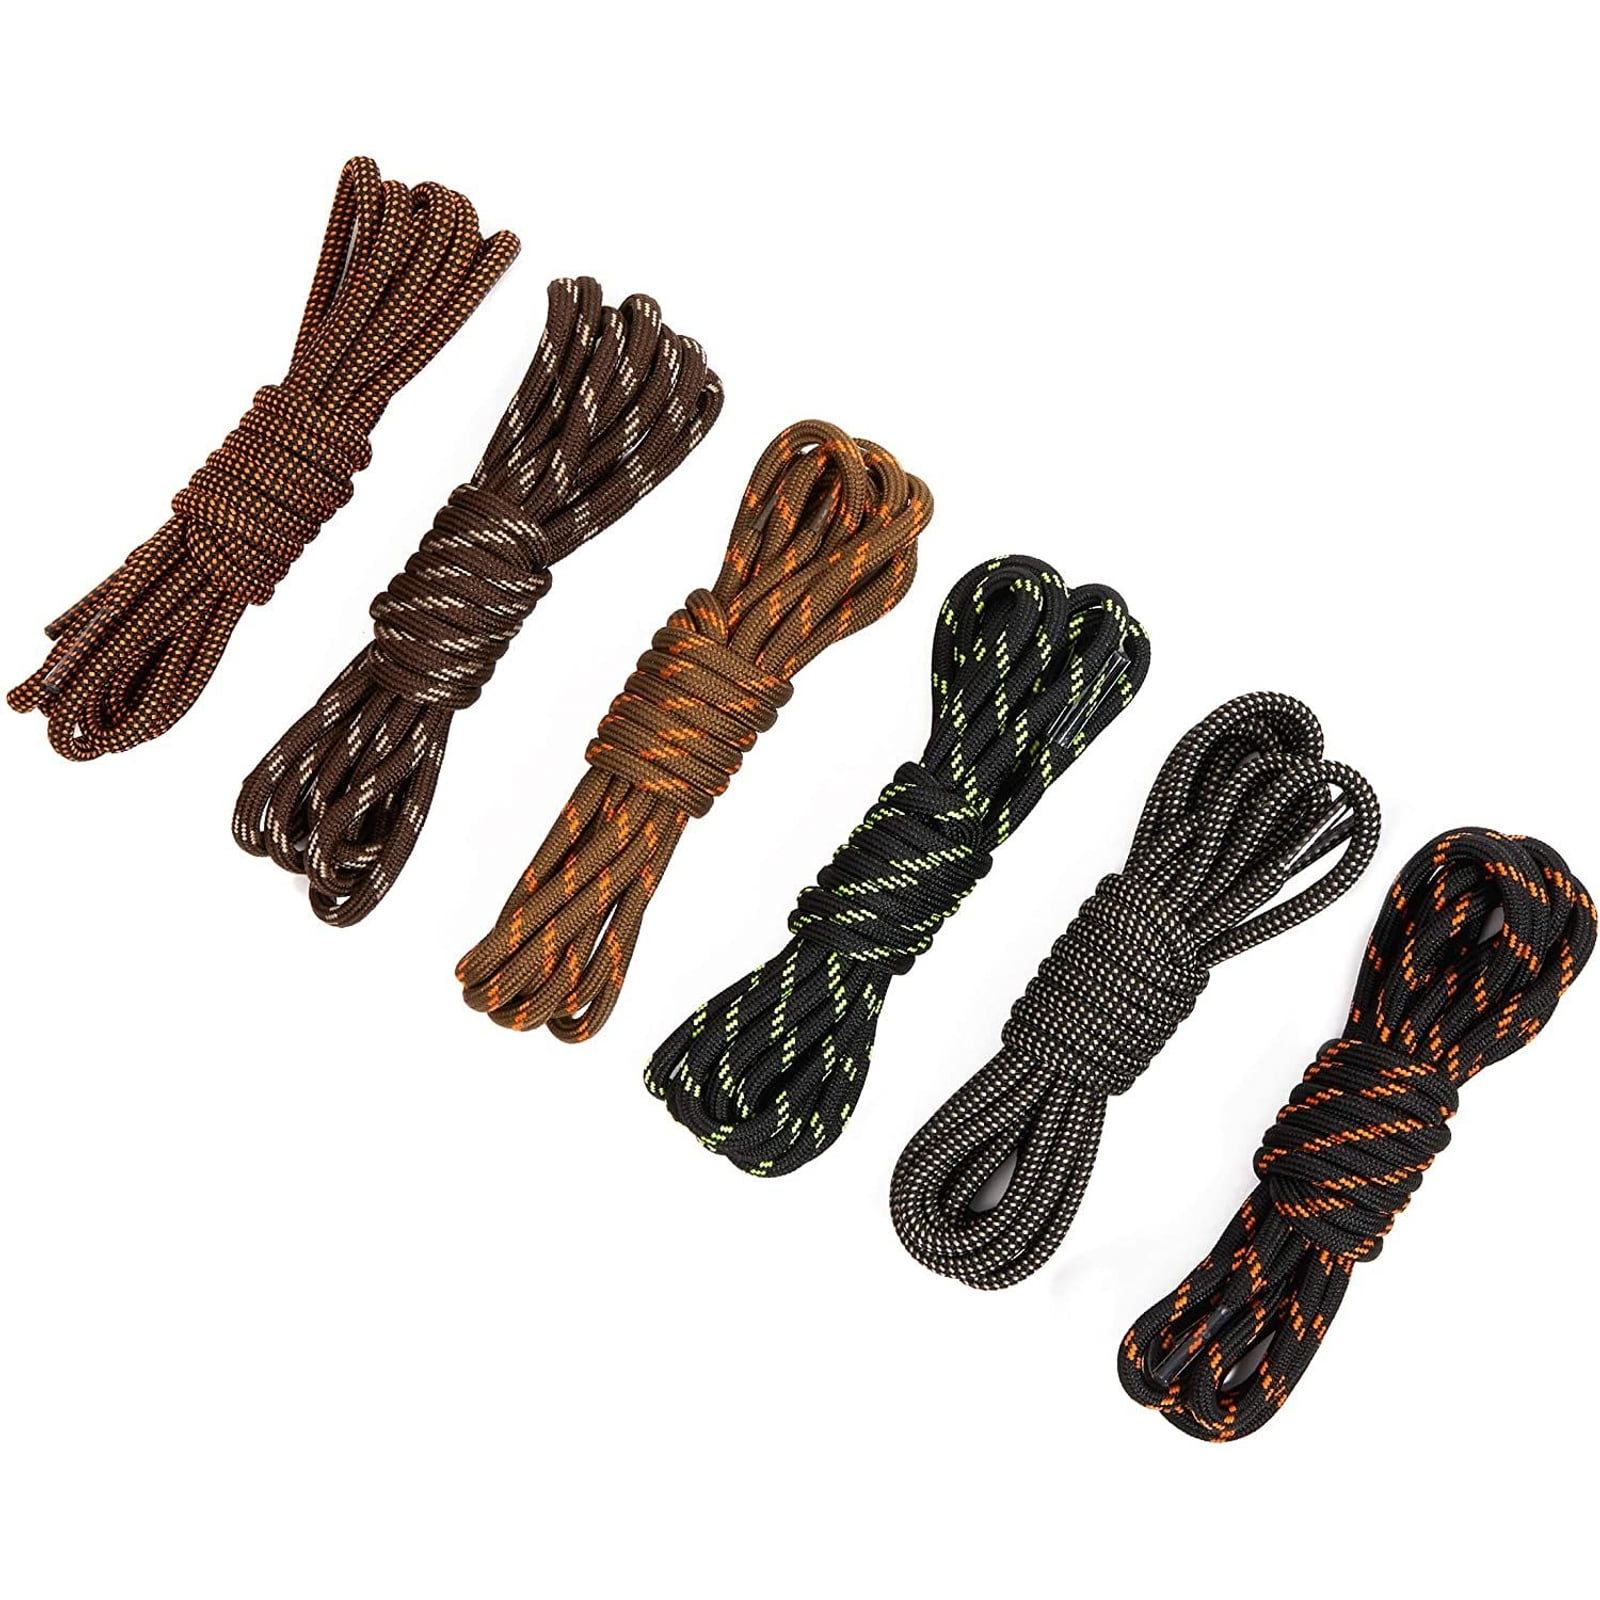 2 6 Pairs Free Shipping Round Shoelace 19 Multi Color 27",36",45",54" & 1 